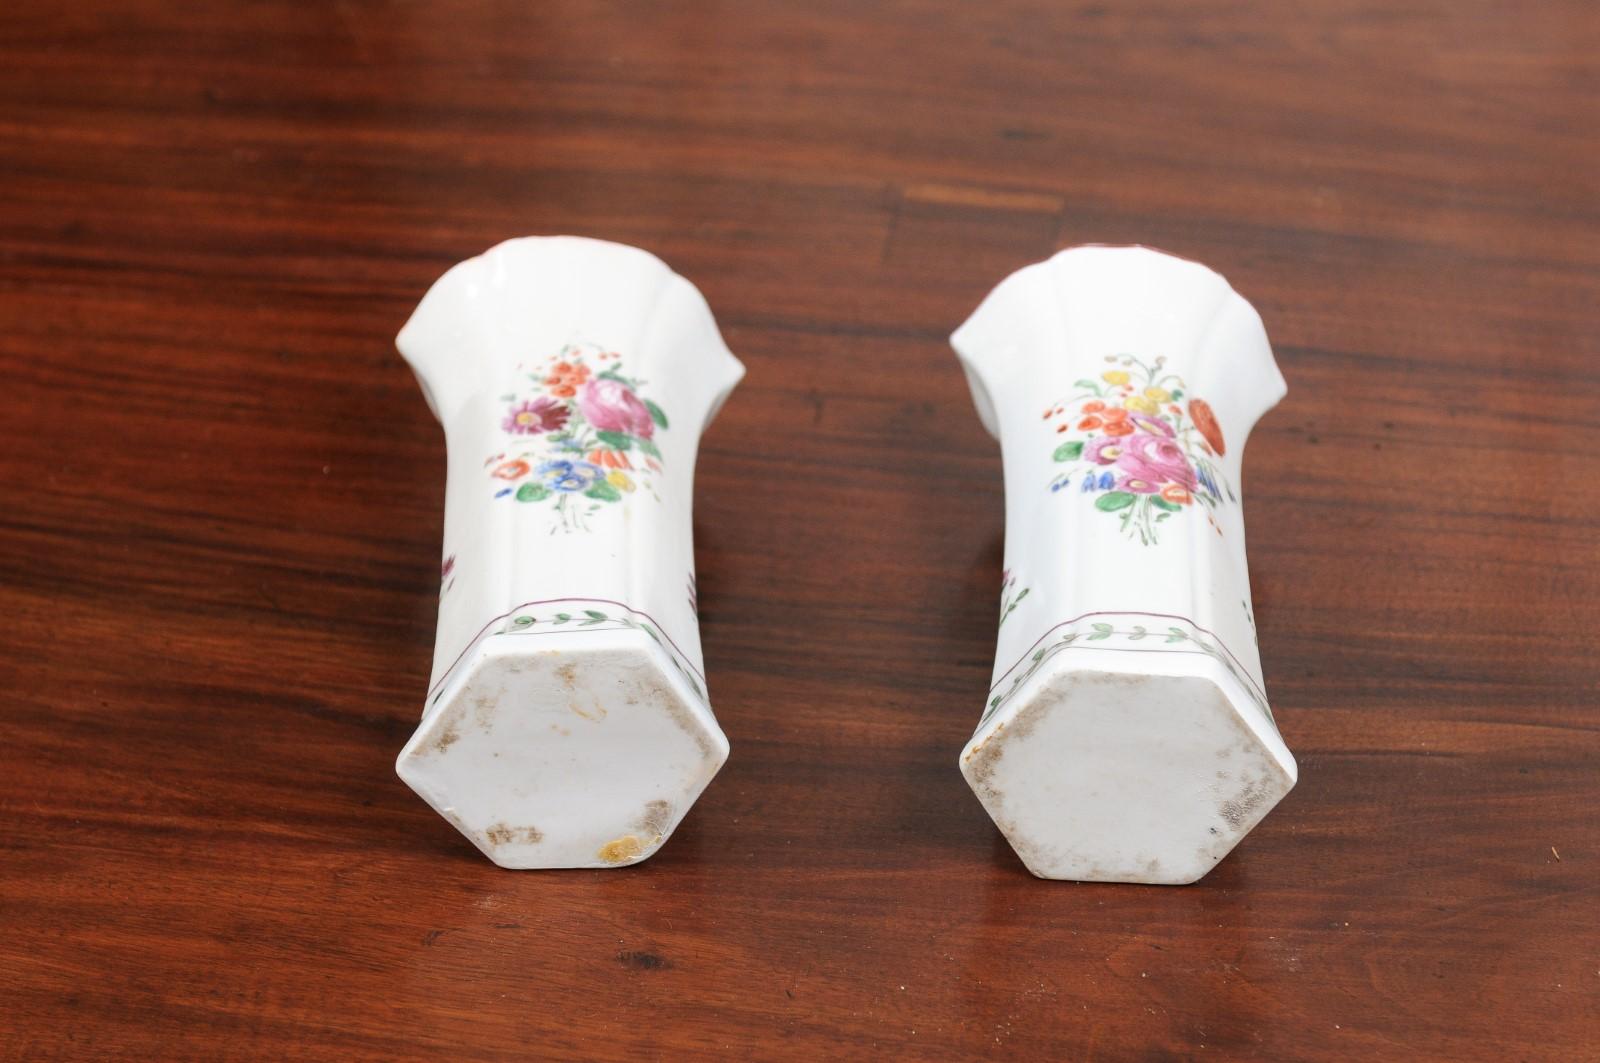 Pair of Italian Porcelain Vases with Colorful Painted Floral Motifs, circa 1805 For Sale 9